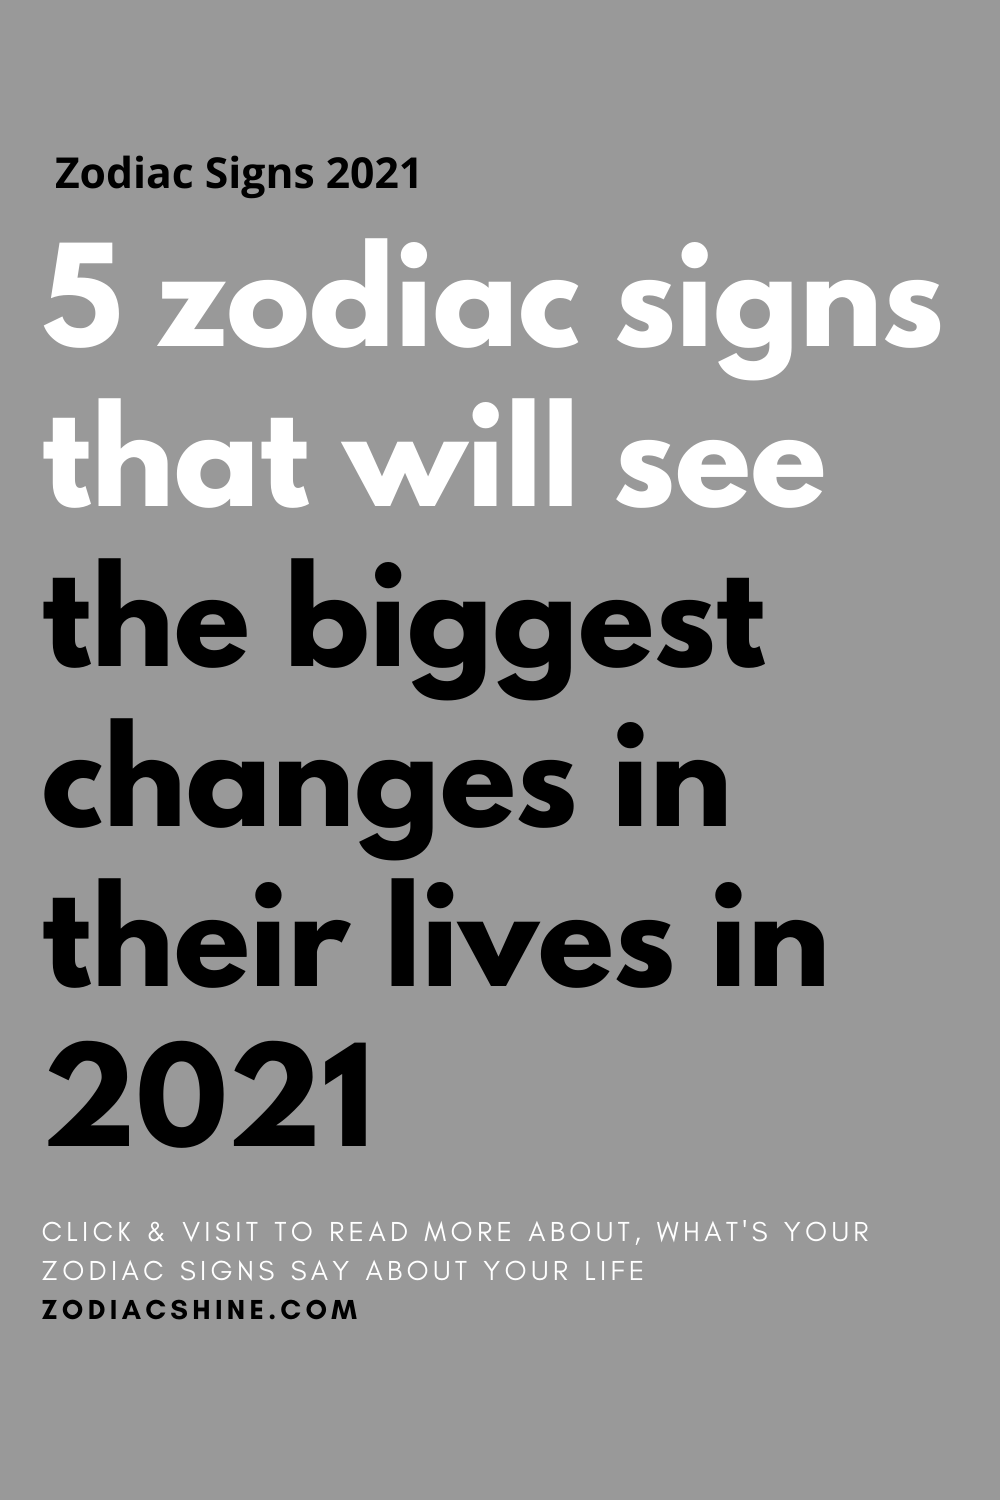 5 zodiac signs that will see the biggest changes in their lives in 2021